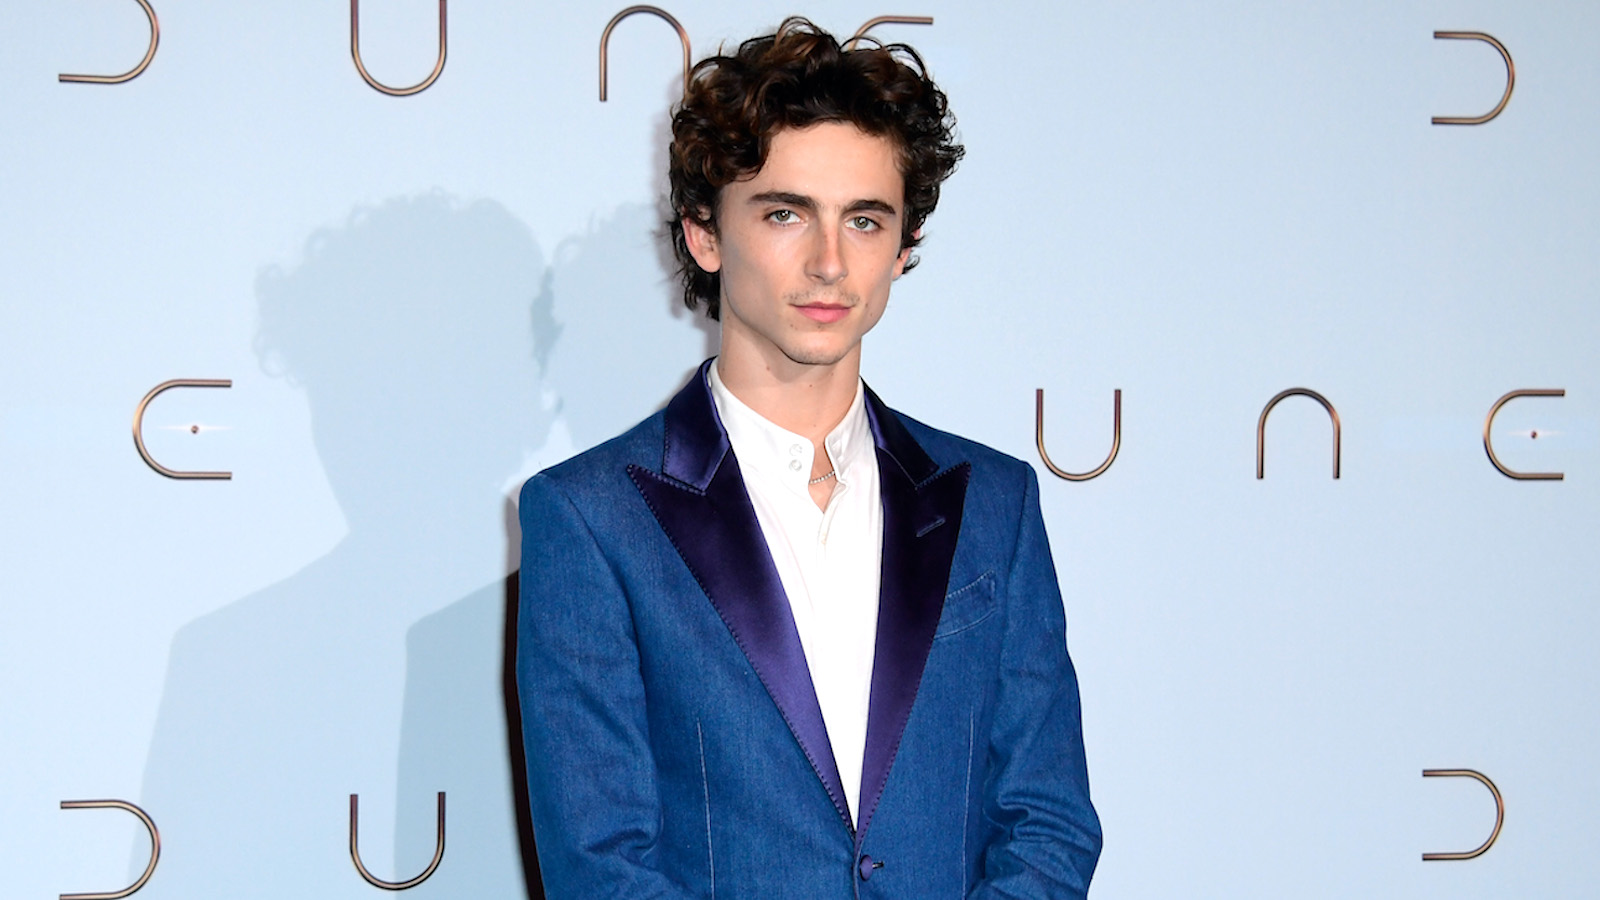 Timothée Chalamet at a promotional event for his 2021 film Dune.